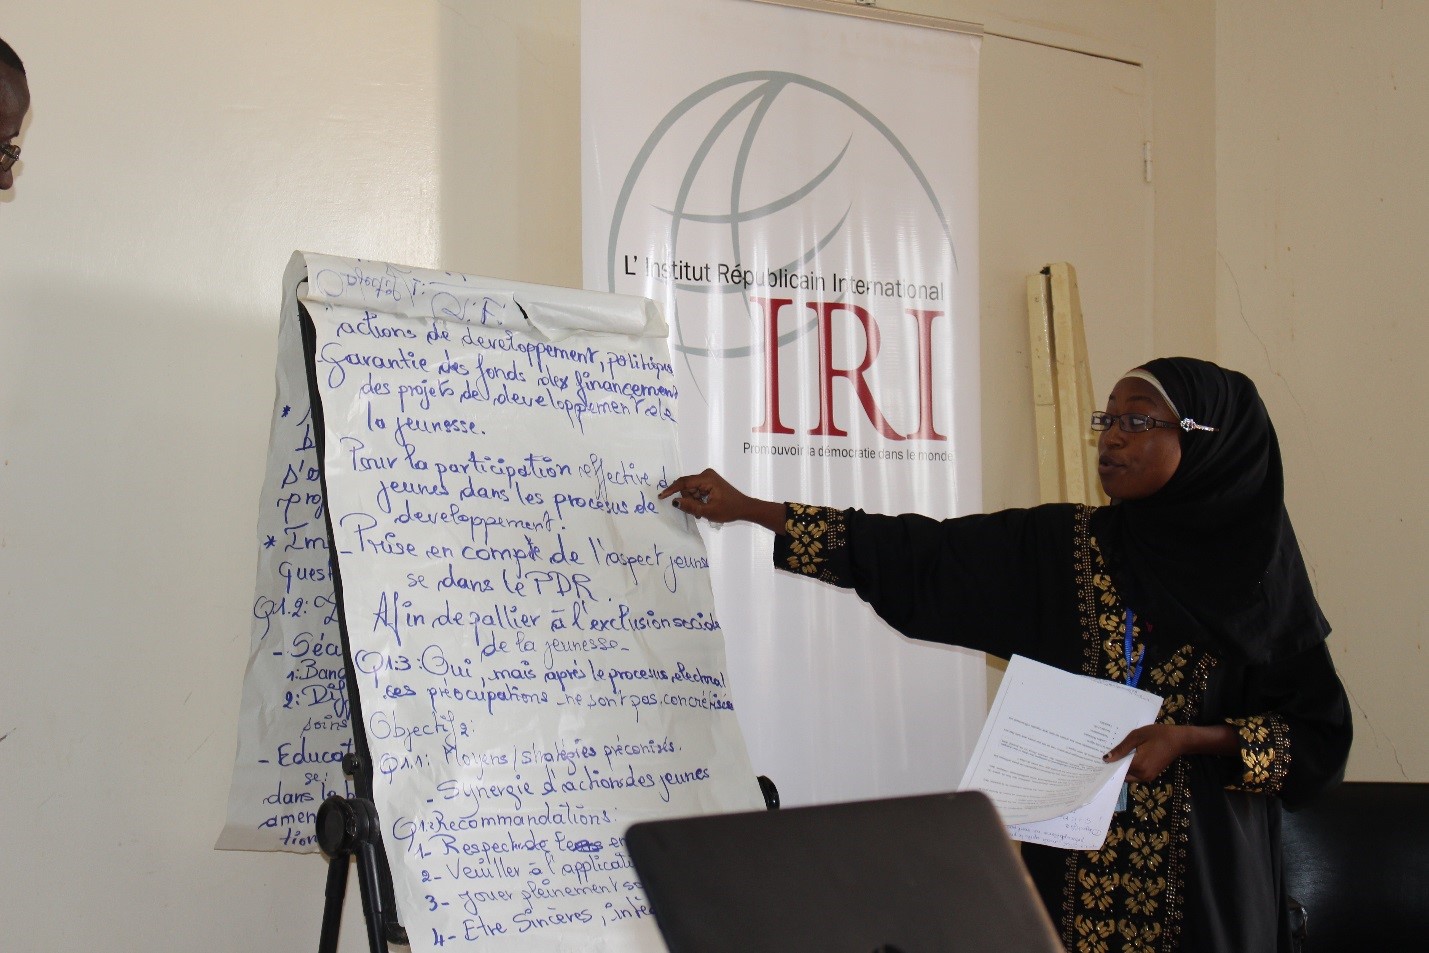 A young Nigerien women presents the recommendations of her working group during IRI’s regional youth dialogue in Tillabéri, Niger.